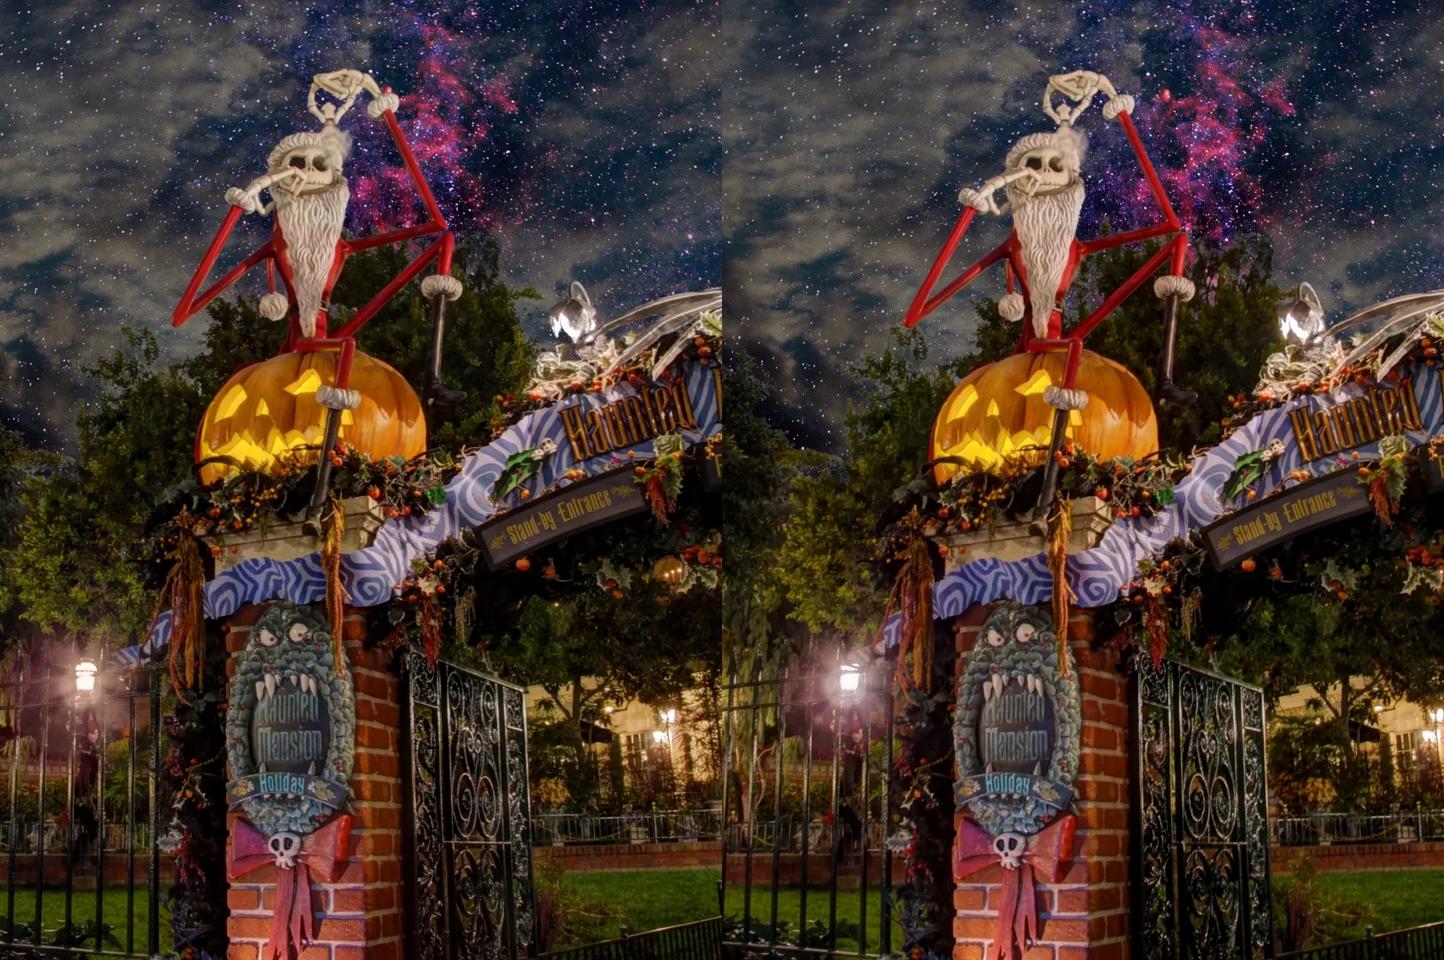 Jack Skellington - Nightmare Before Christmas at The Haunted Mansion